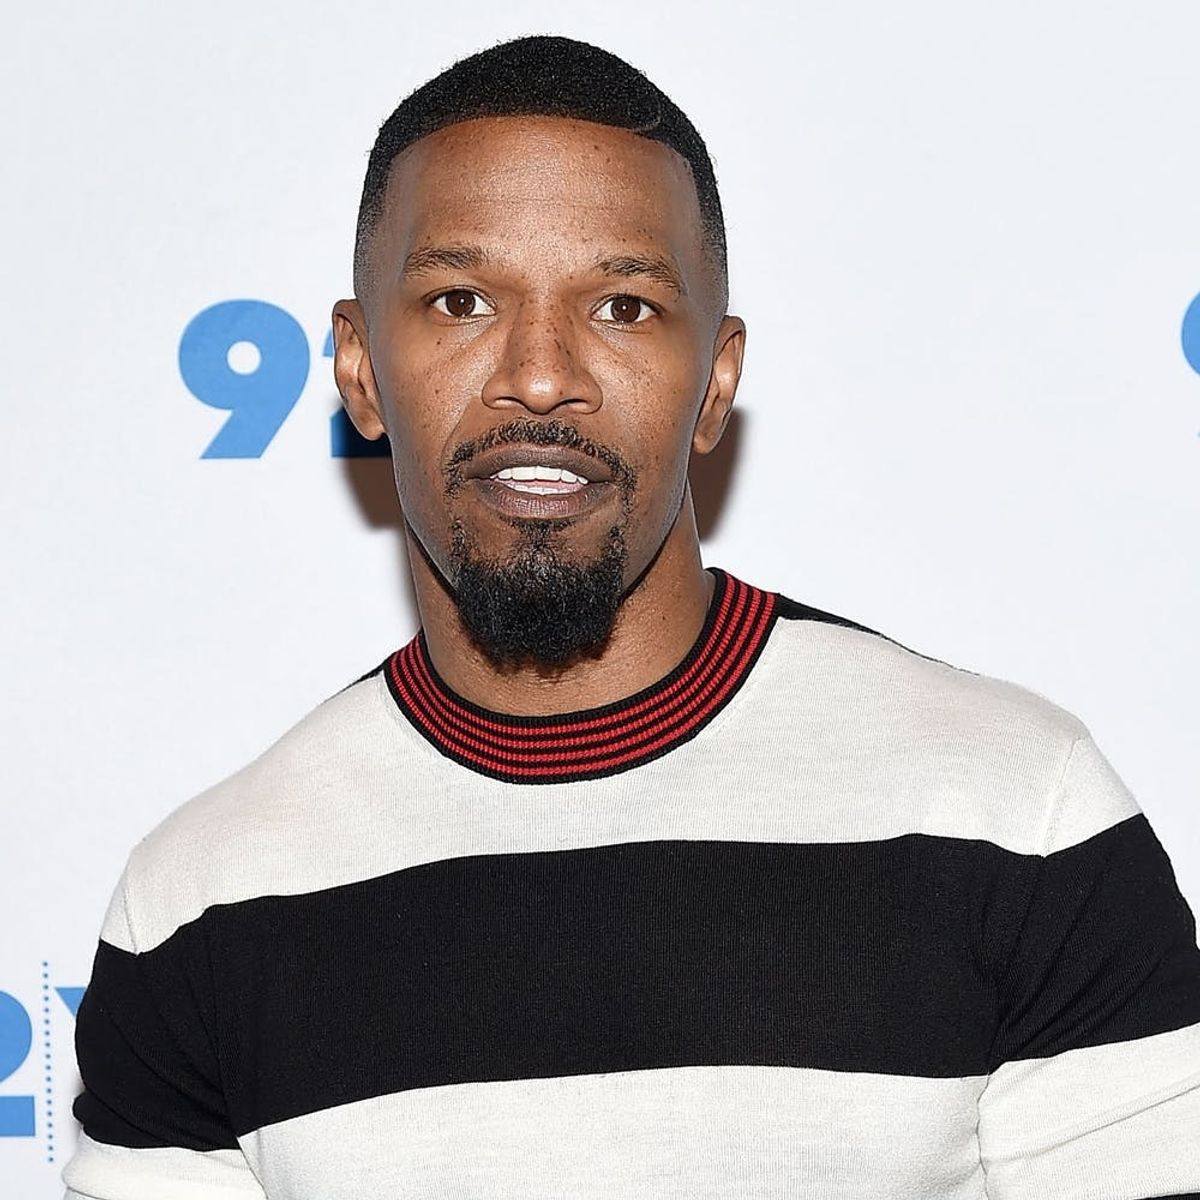 People Are Pissed at Jamie Foxx for Acting Out False Sign Language on TV